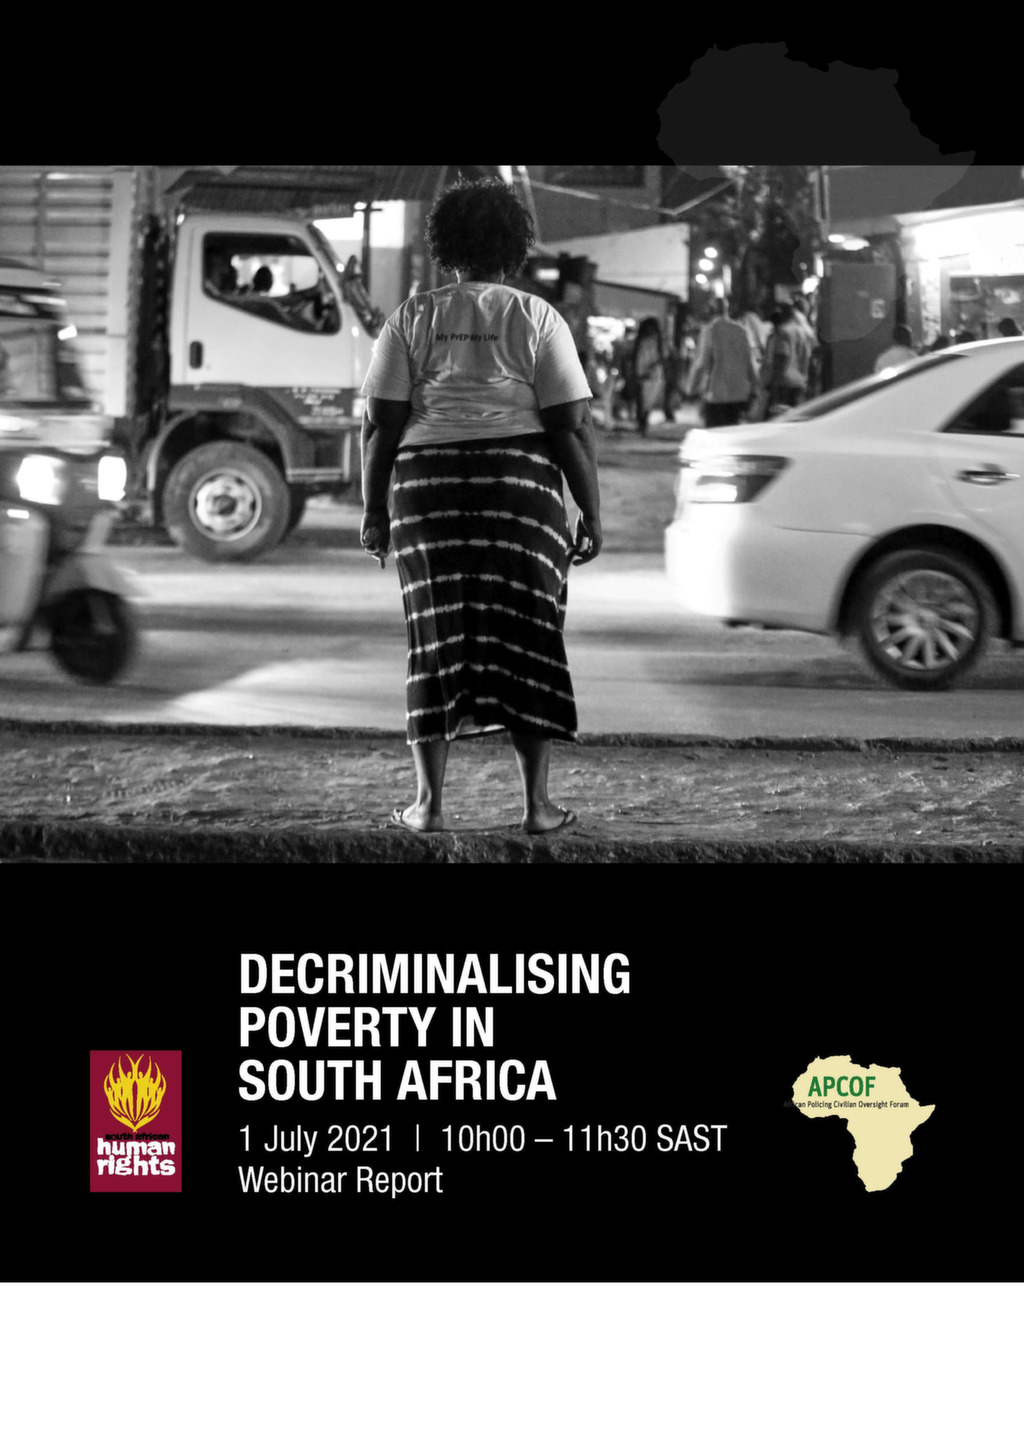 Decriminalising poverty in south africa